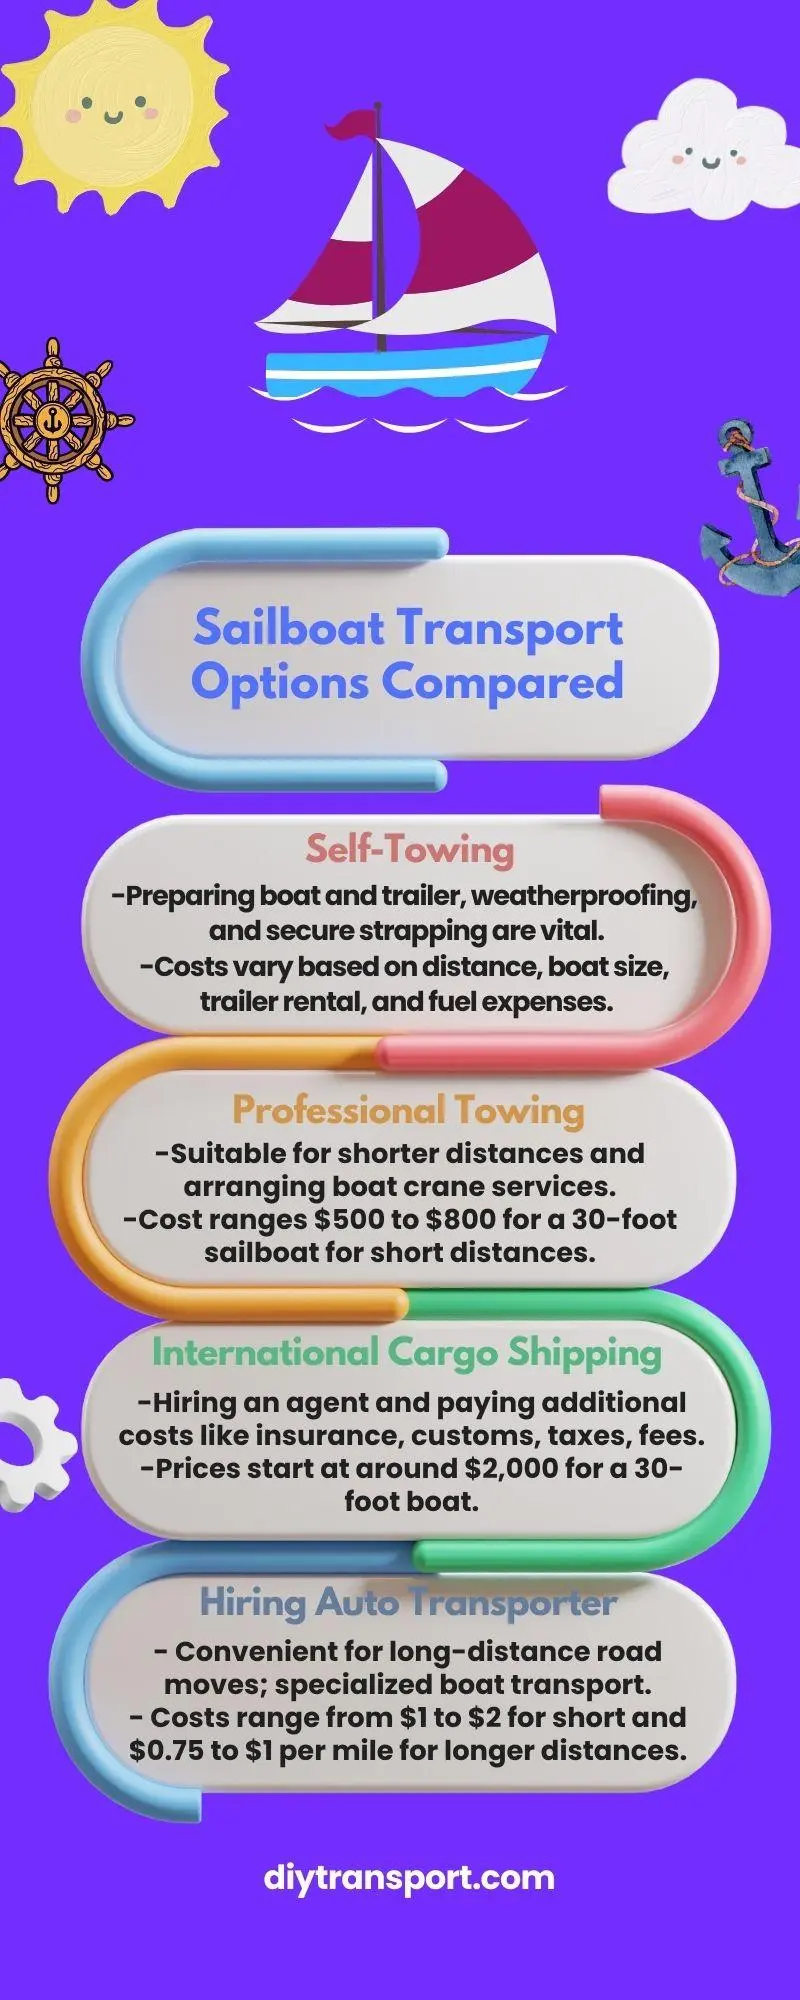 Sailboat Transport Options Compared